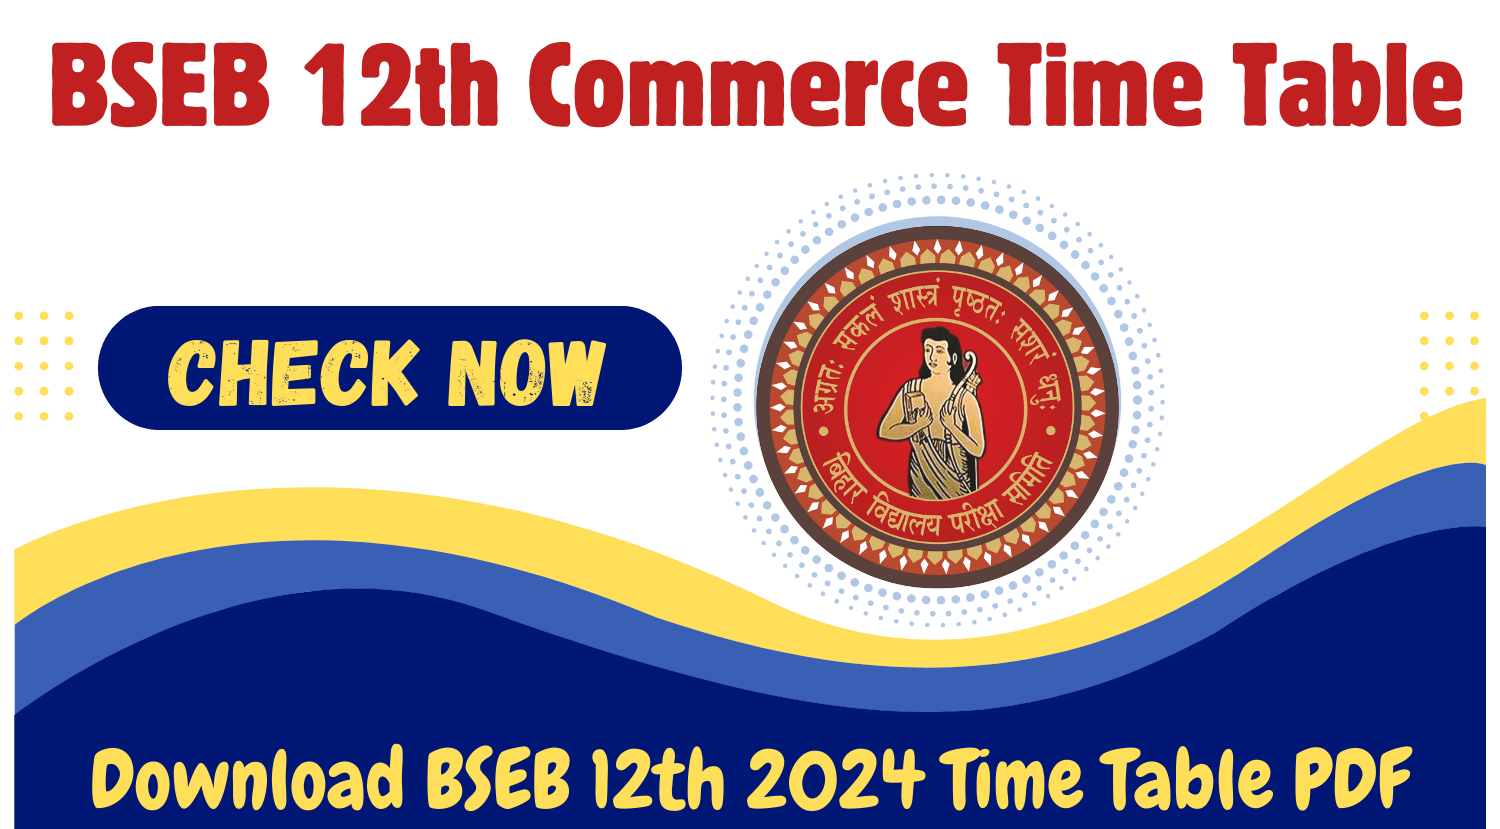 BSEB-12th-Commerce-Time-Table